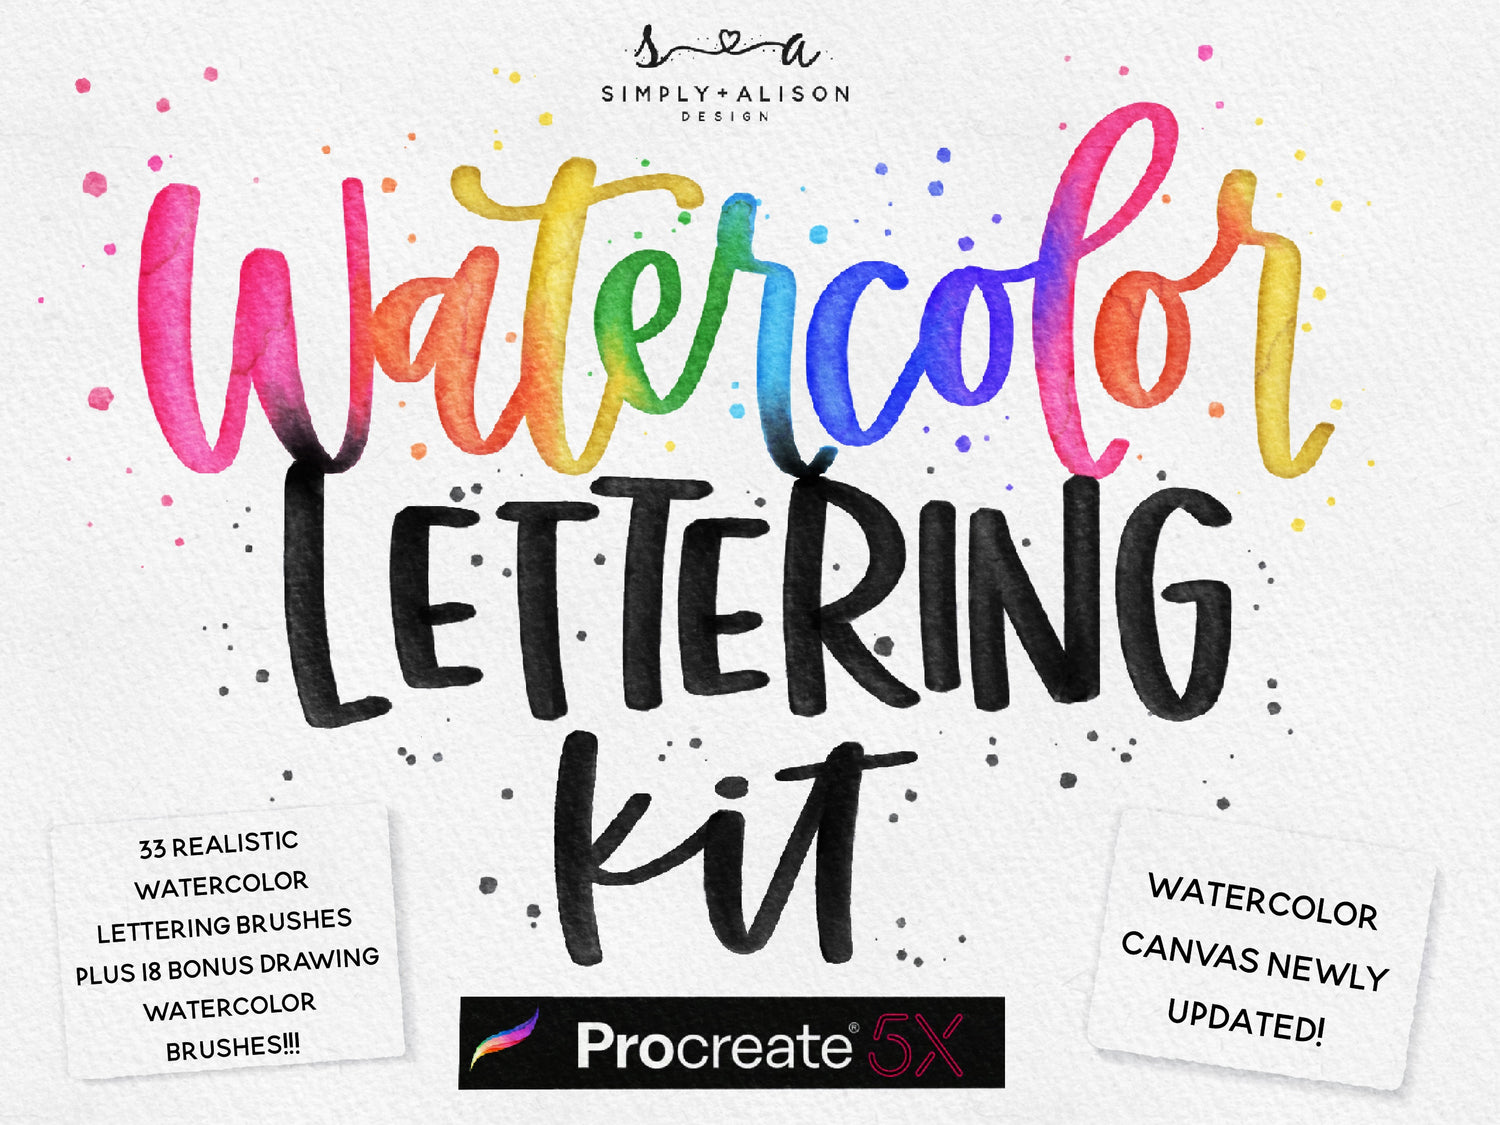 Realistic Watercolor Lettering Brushes – Simplyalisonwagner